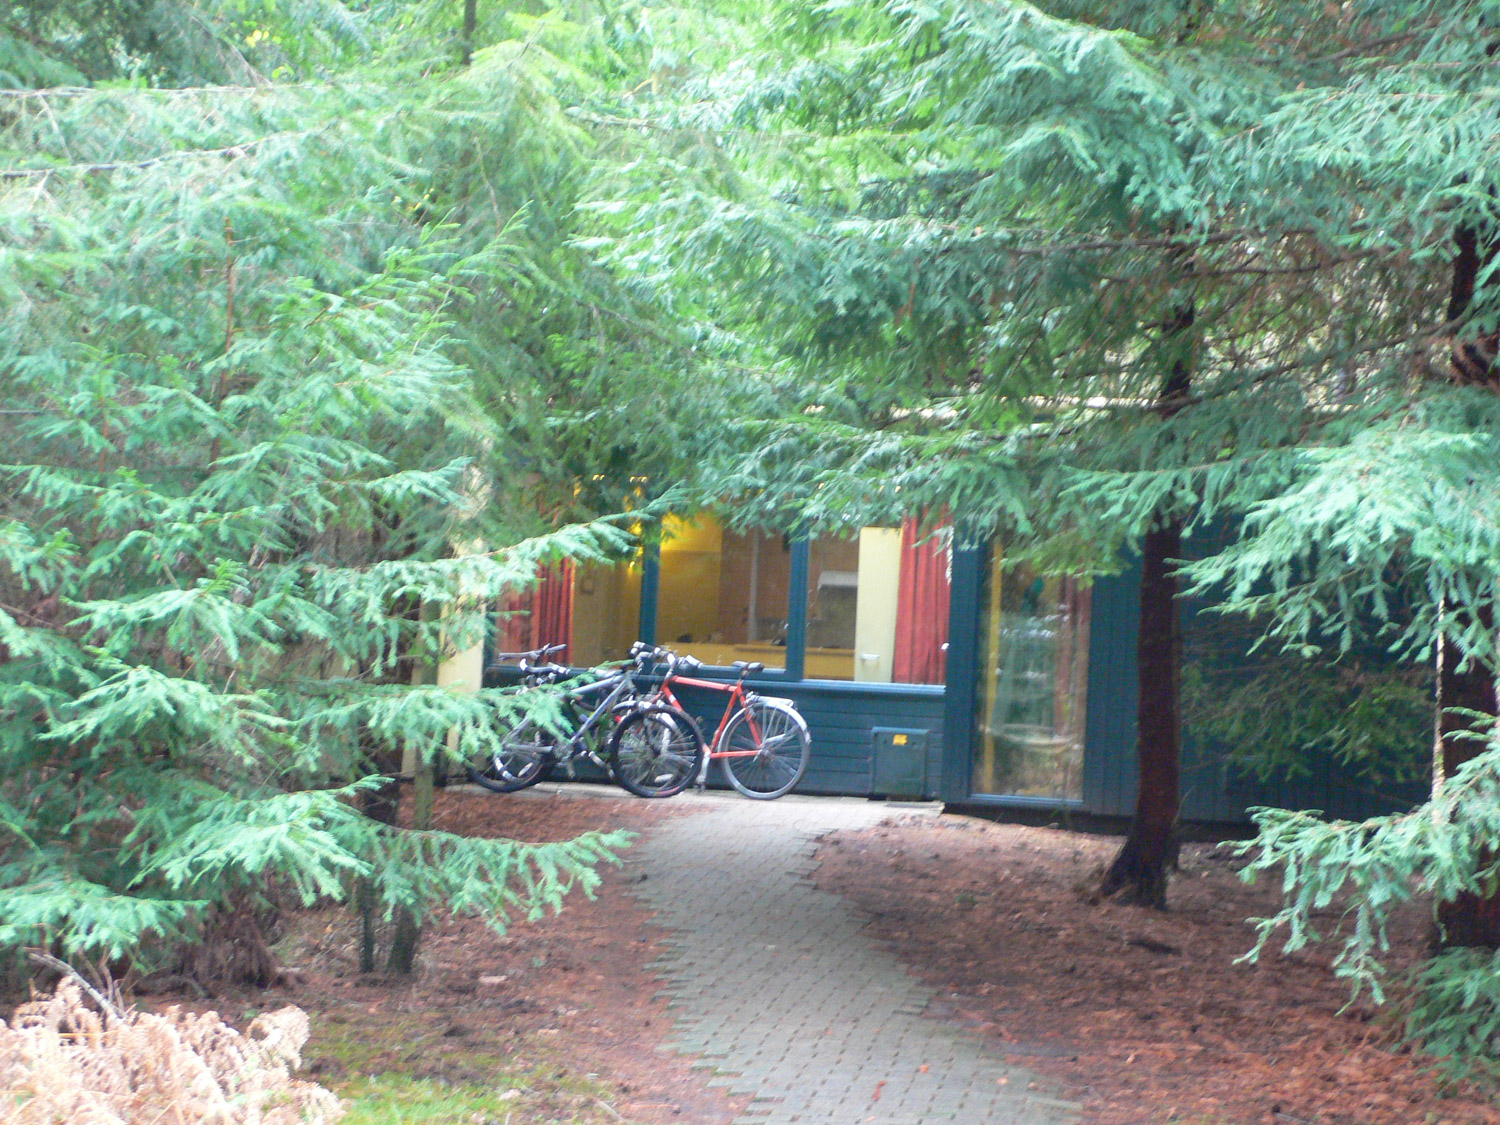 Cabin in the forest at Centerparcs Longleat